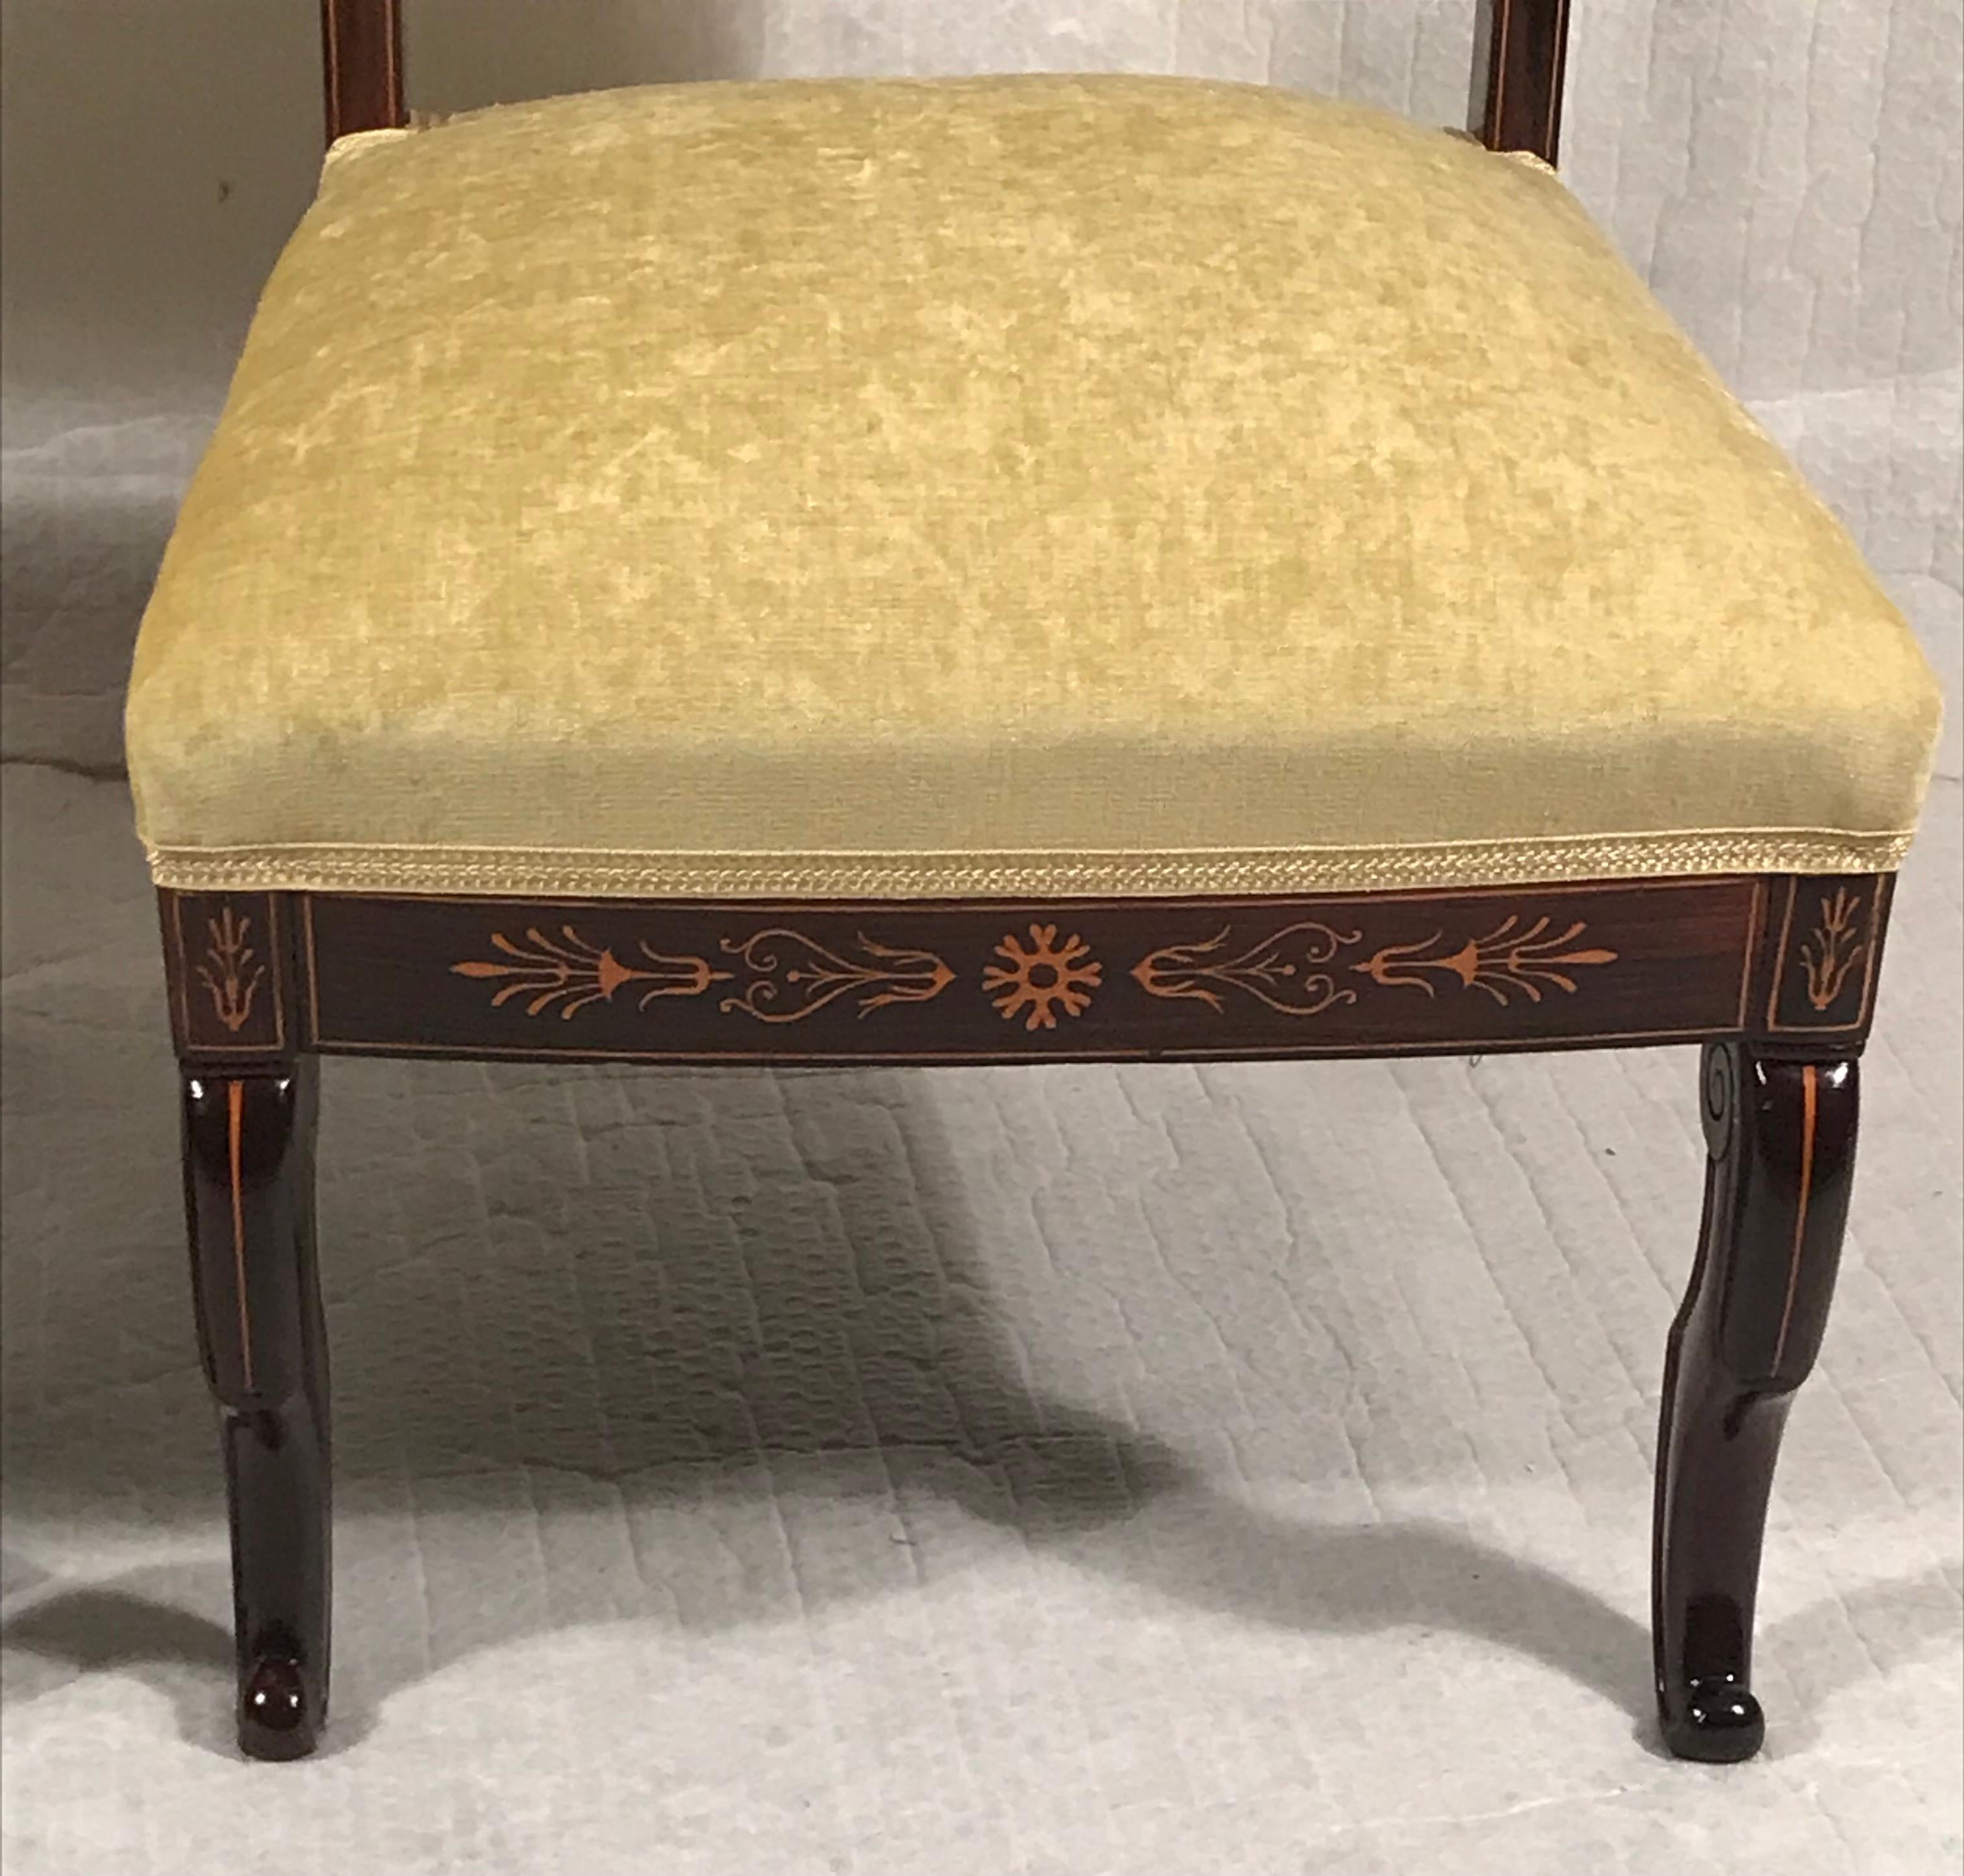 This pair of low chairs dates back to around 1840 and comes from France. The chairs were made during the French Restoration (Restauration) period.
There is an interesting explanation why low chairs were produced in the 19th century. The low-slung